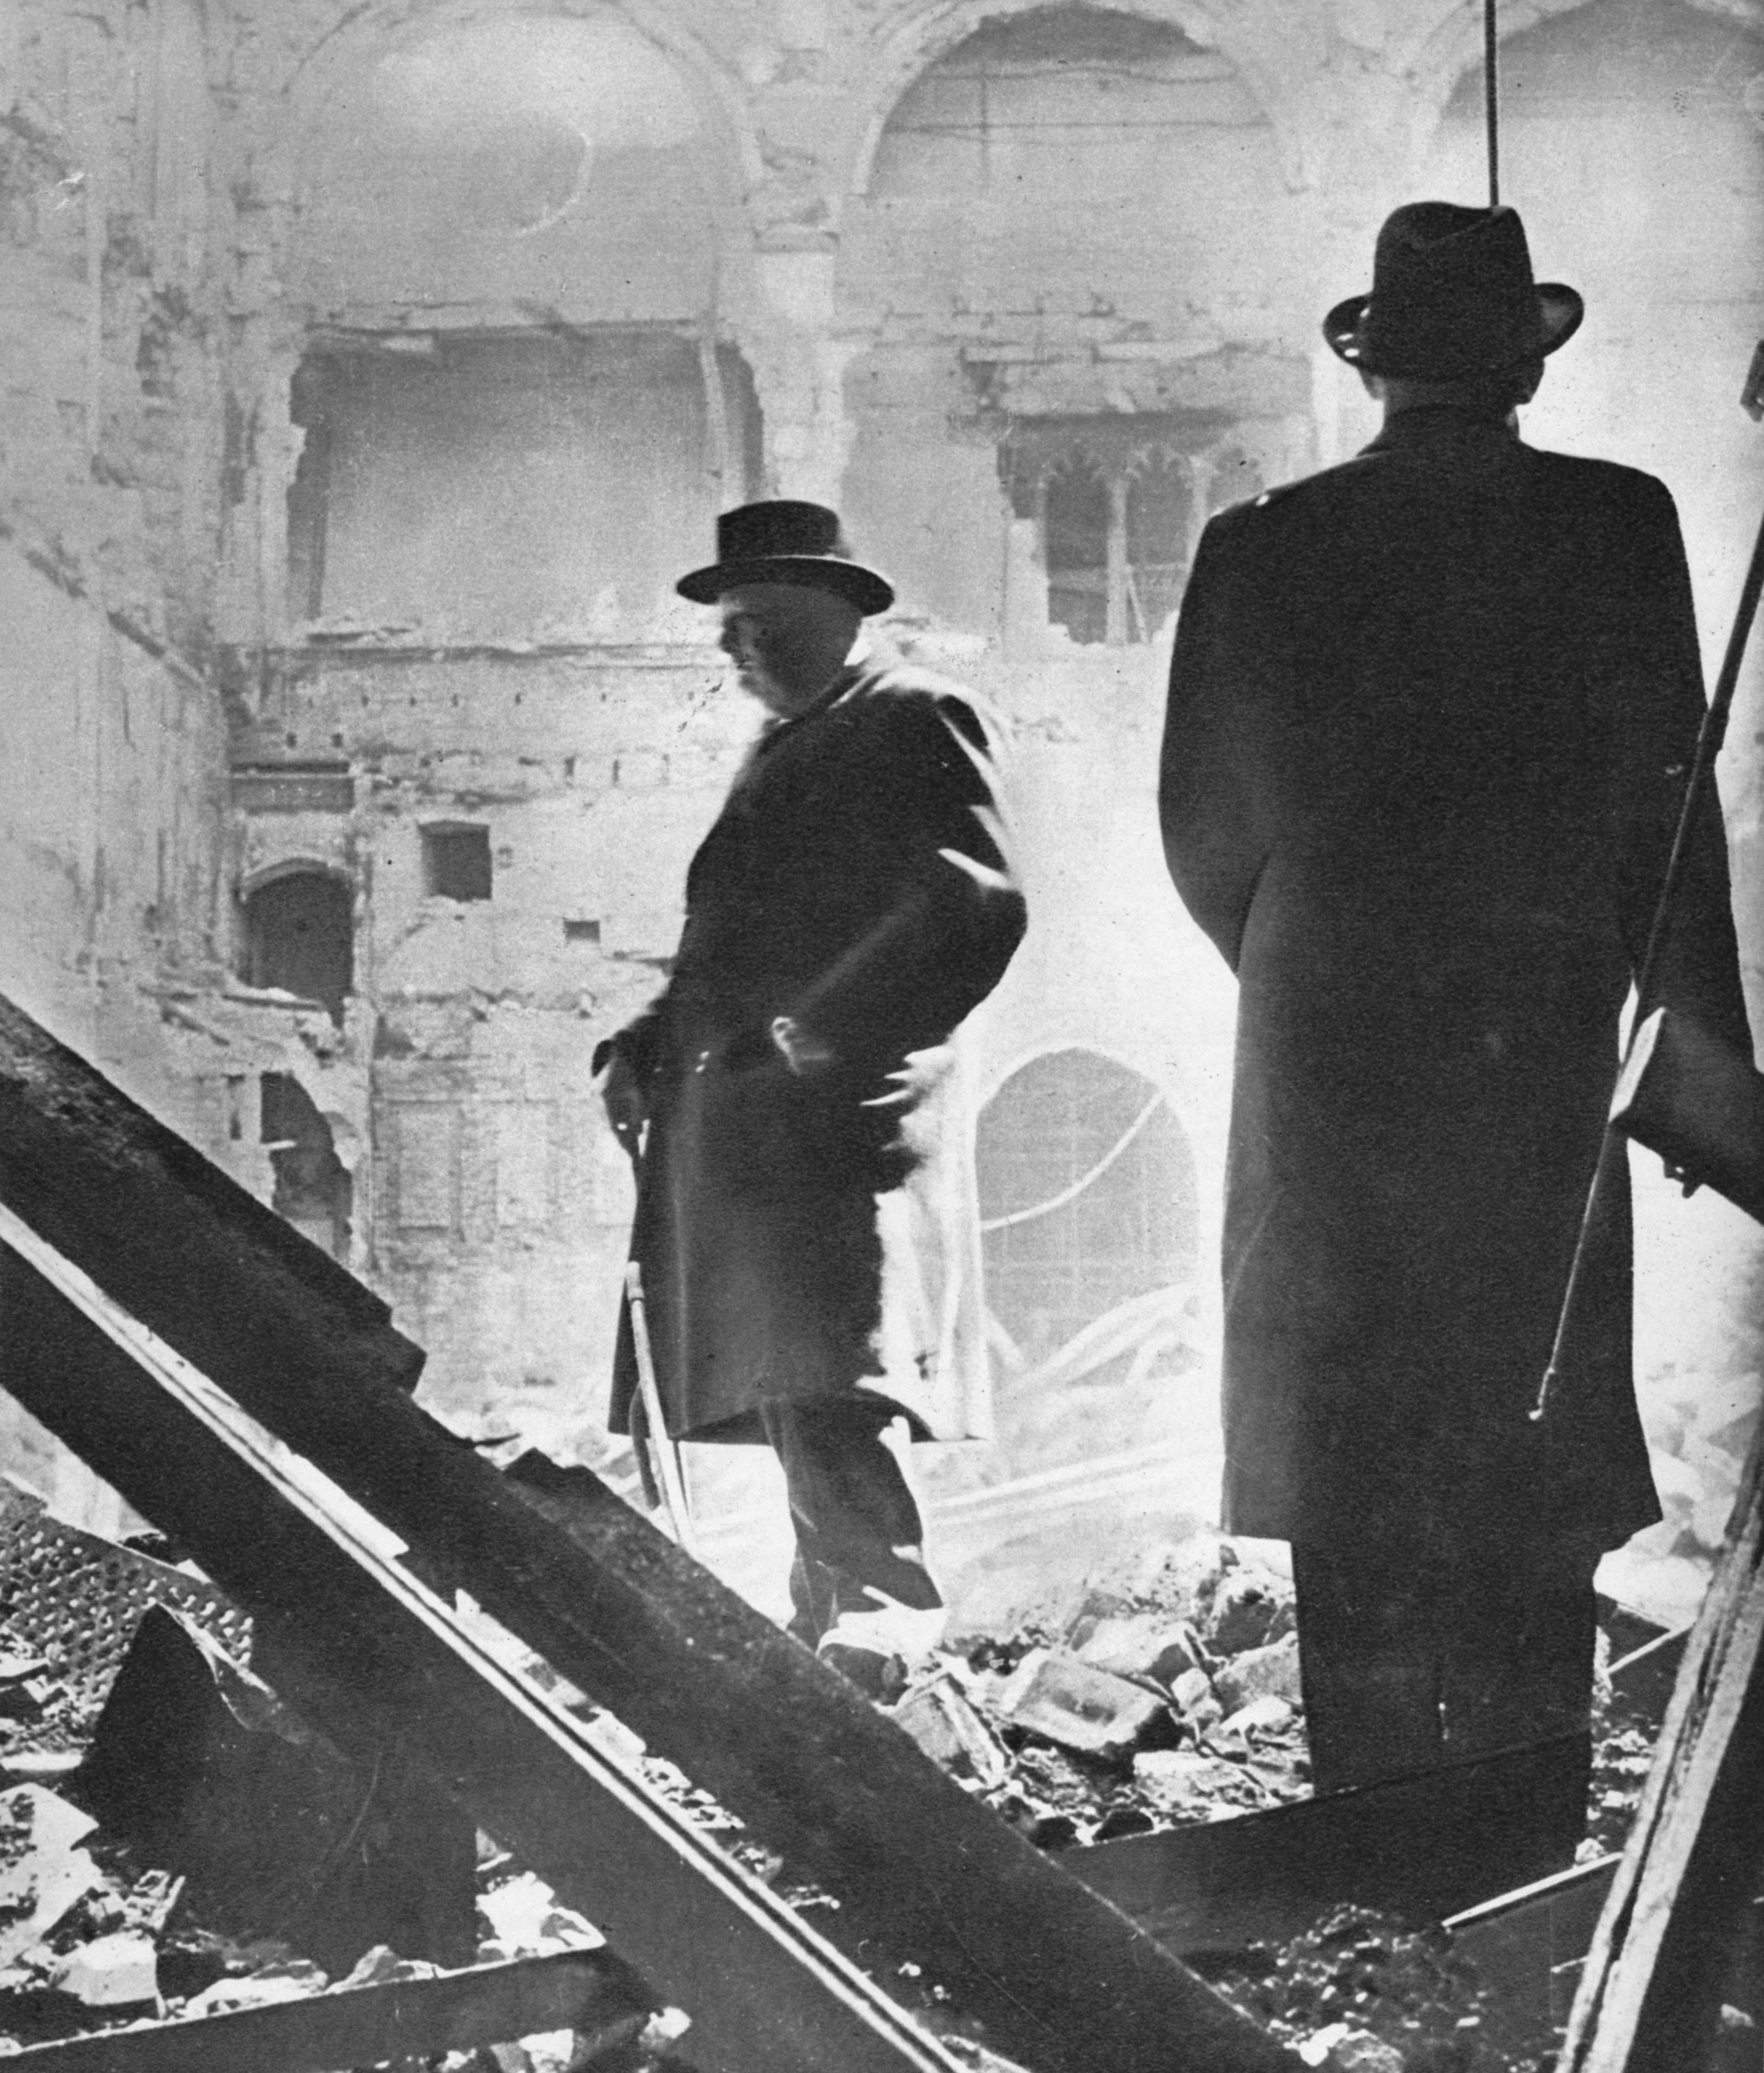 Mr. Churchill contemplates the ruins of the House of Commons, bombed in May 1941', 1941 (1955). Incendiary bombs which fell on the nights of 10 and 11 May 1941 caused the greatest damage to the Palace of Westminster and the Commons Chamber was entirely destroyed by fire. The Palace was damaged by air raids on fourteen different occasions during the war. From Churchill: The Man of the Century - A Pictorial Biography, edited by Neil Ferrier. [L.T.A. Robinson Limited, London, 1955]. Artist Unknown(Photo by The Print Collector/Getty Images)